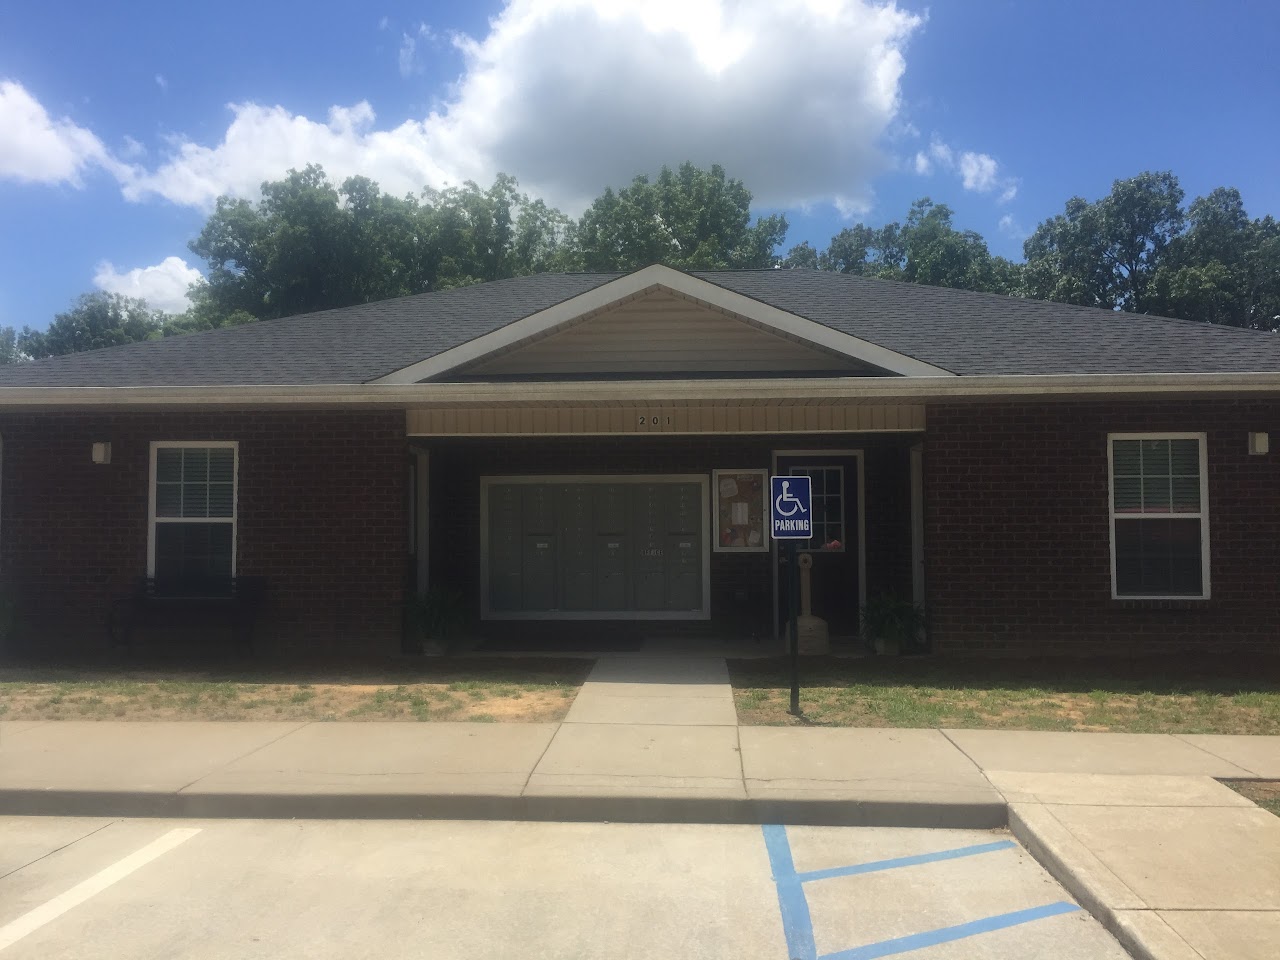 Photo of DEER RIDGE APTS. Affordable housing located at 201 OAKDALE RD CAMDEN, TN 38320